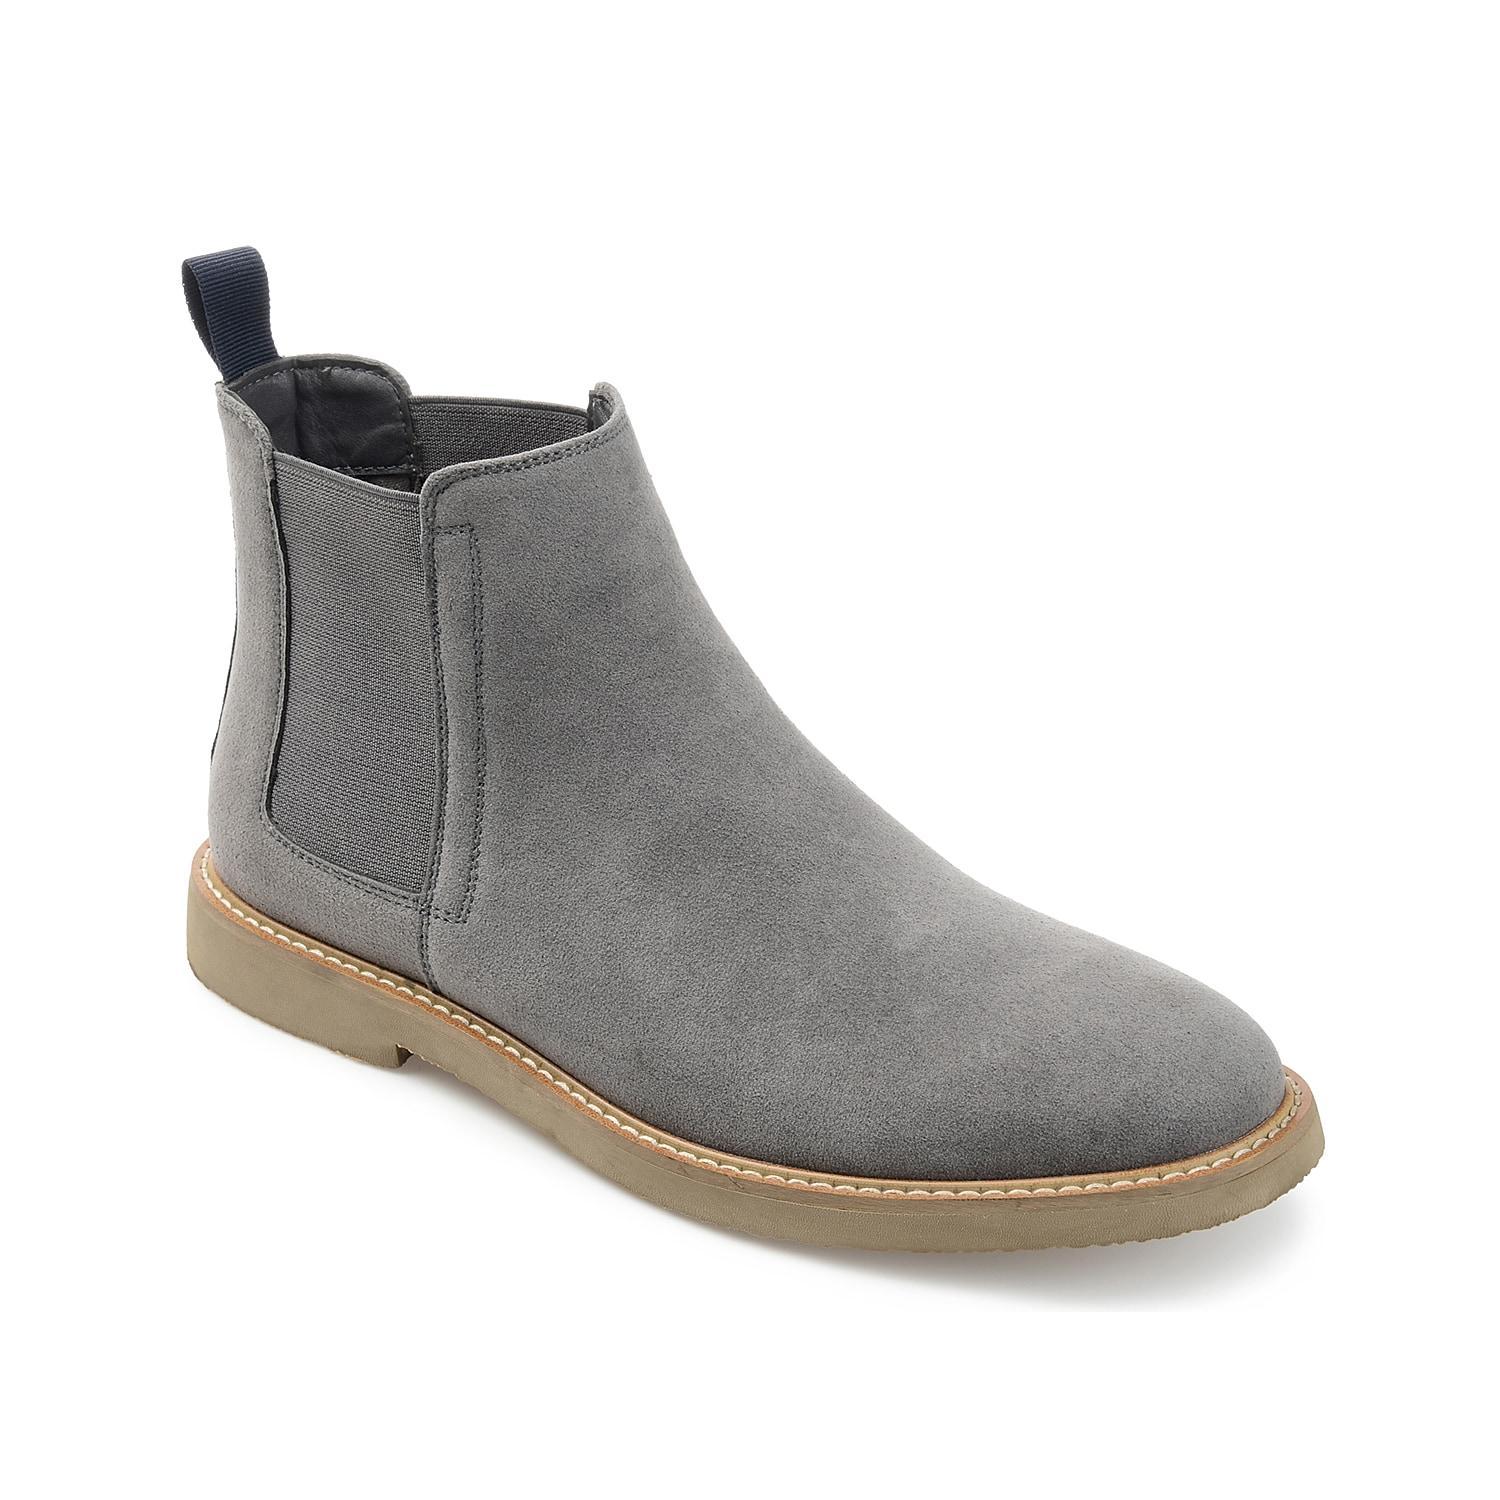 Vance Co. Marshon Mens Chelsea Boots Grey Product Image